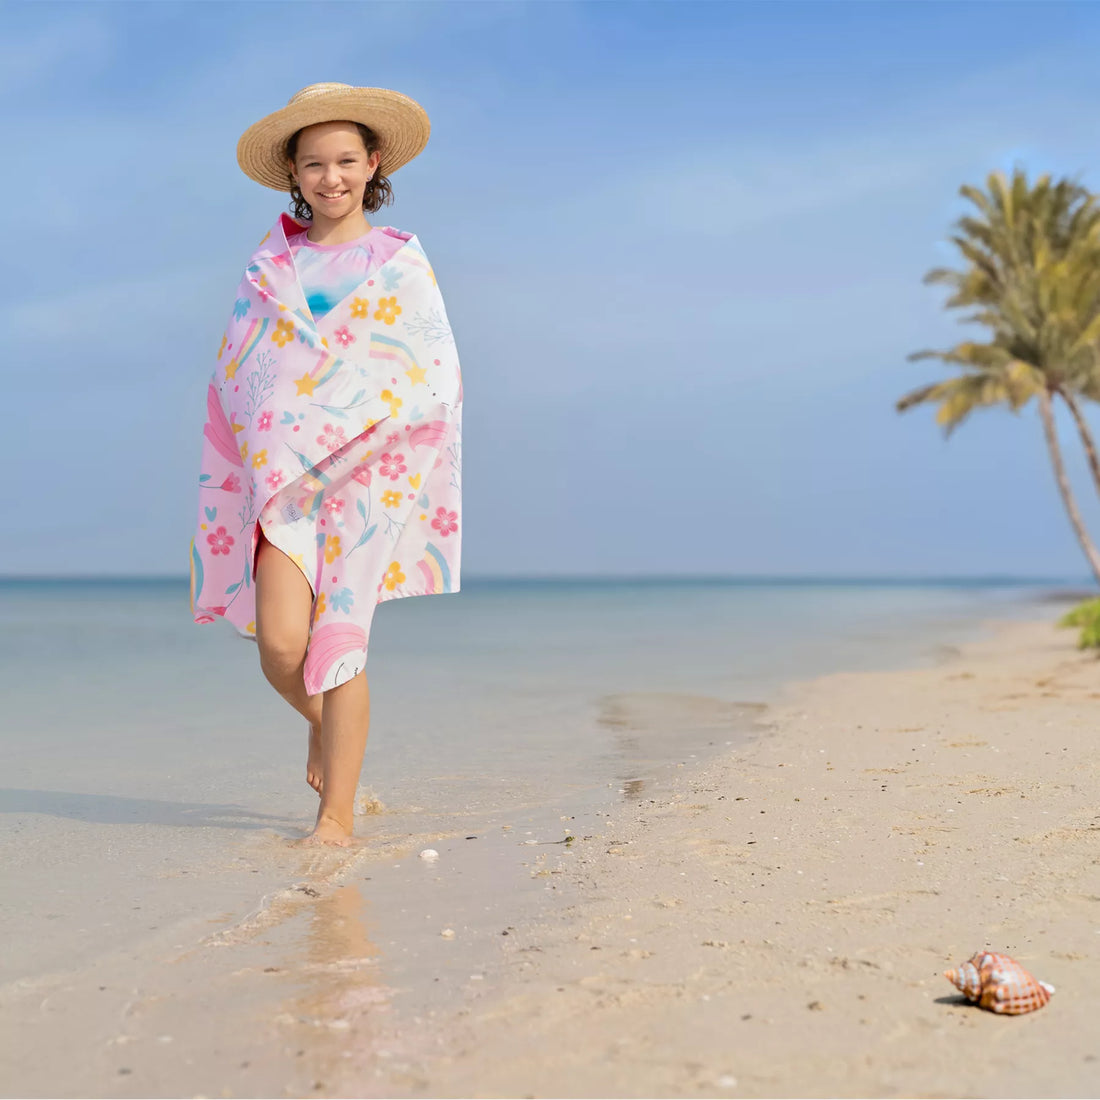 A girl wrapped in a Quick Dry, Sand Free, Light Weight, Compact and Ecofriendly Microfiber Beach Towel from La Toalla with kids design